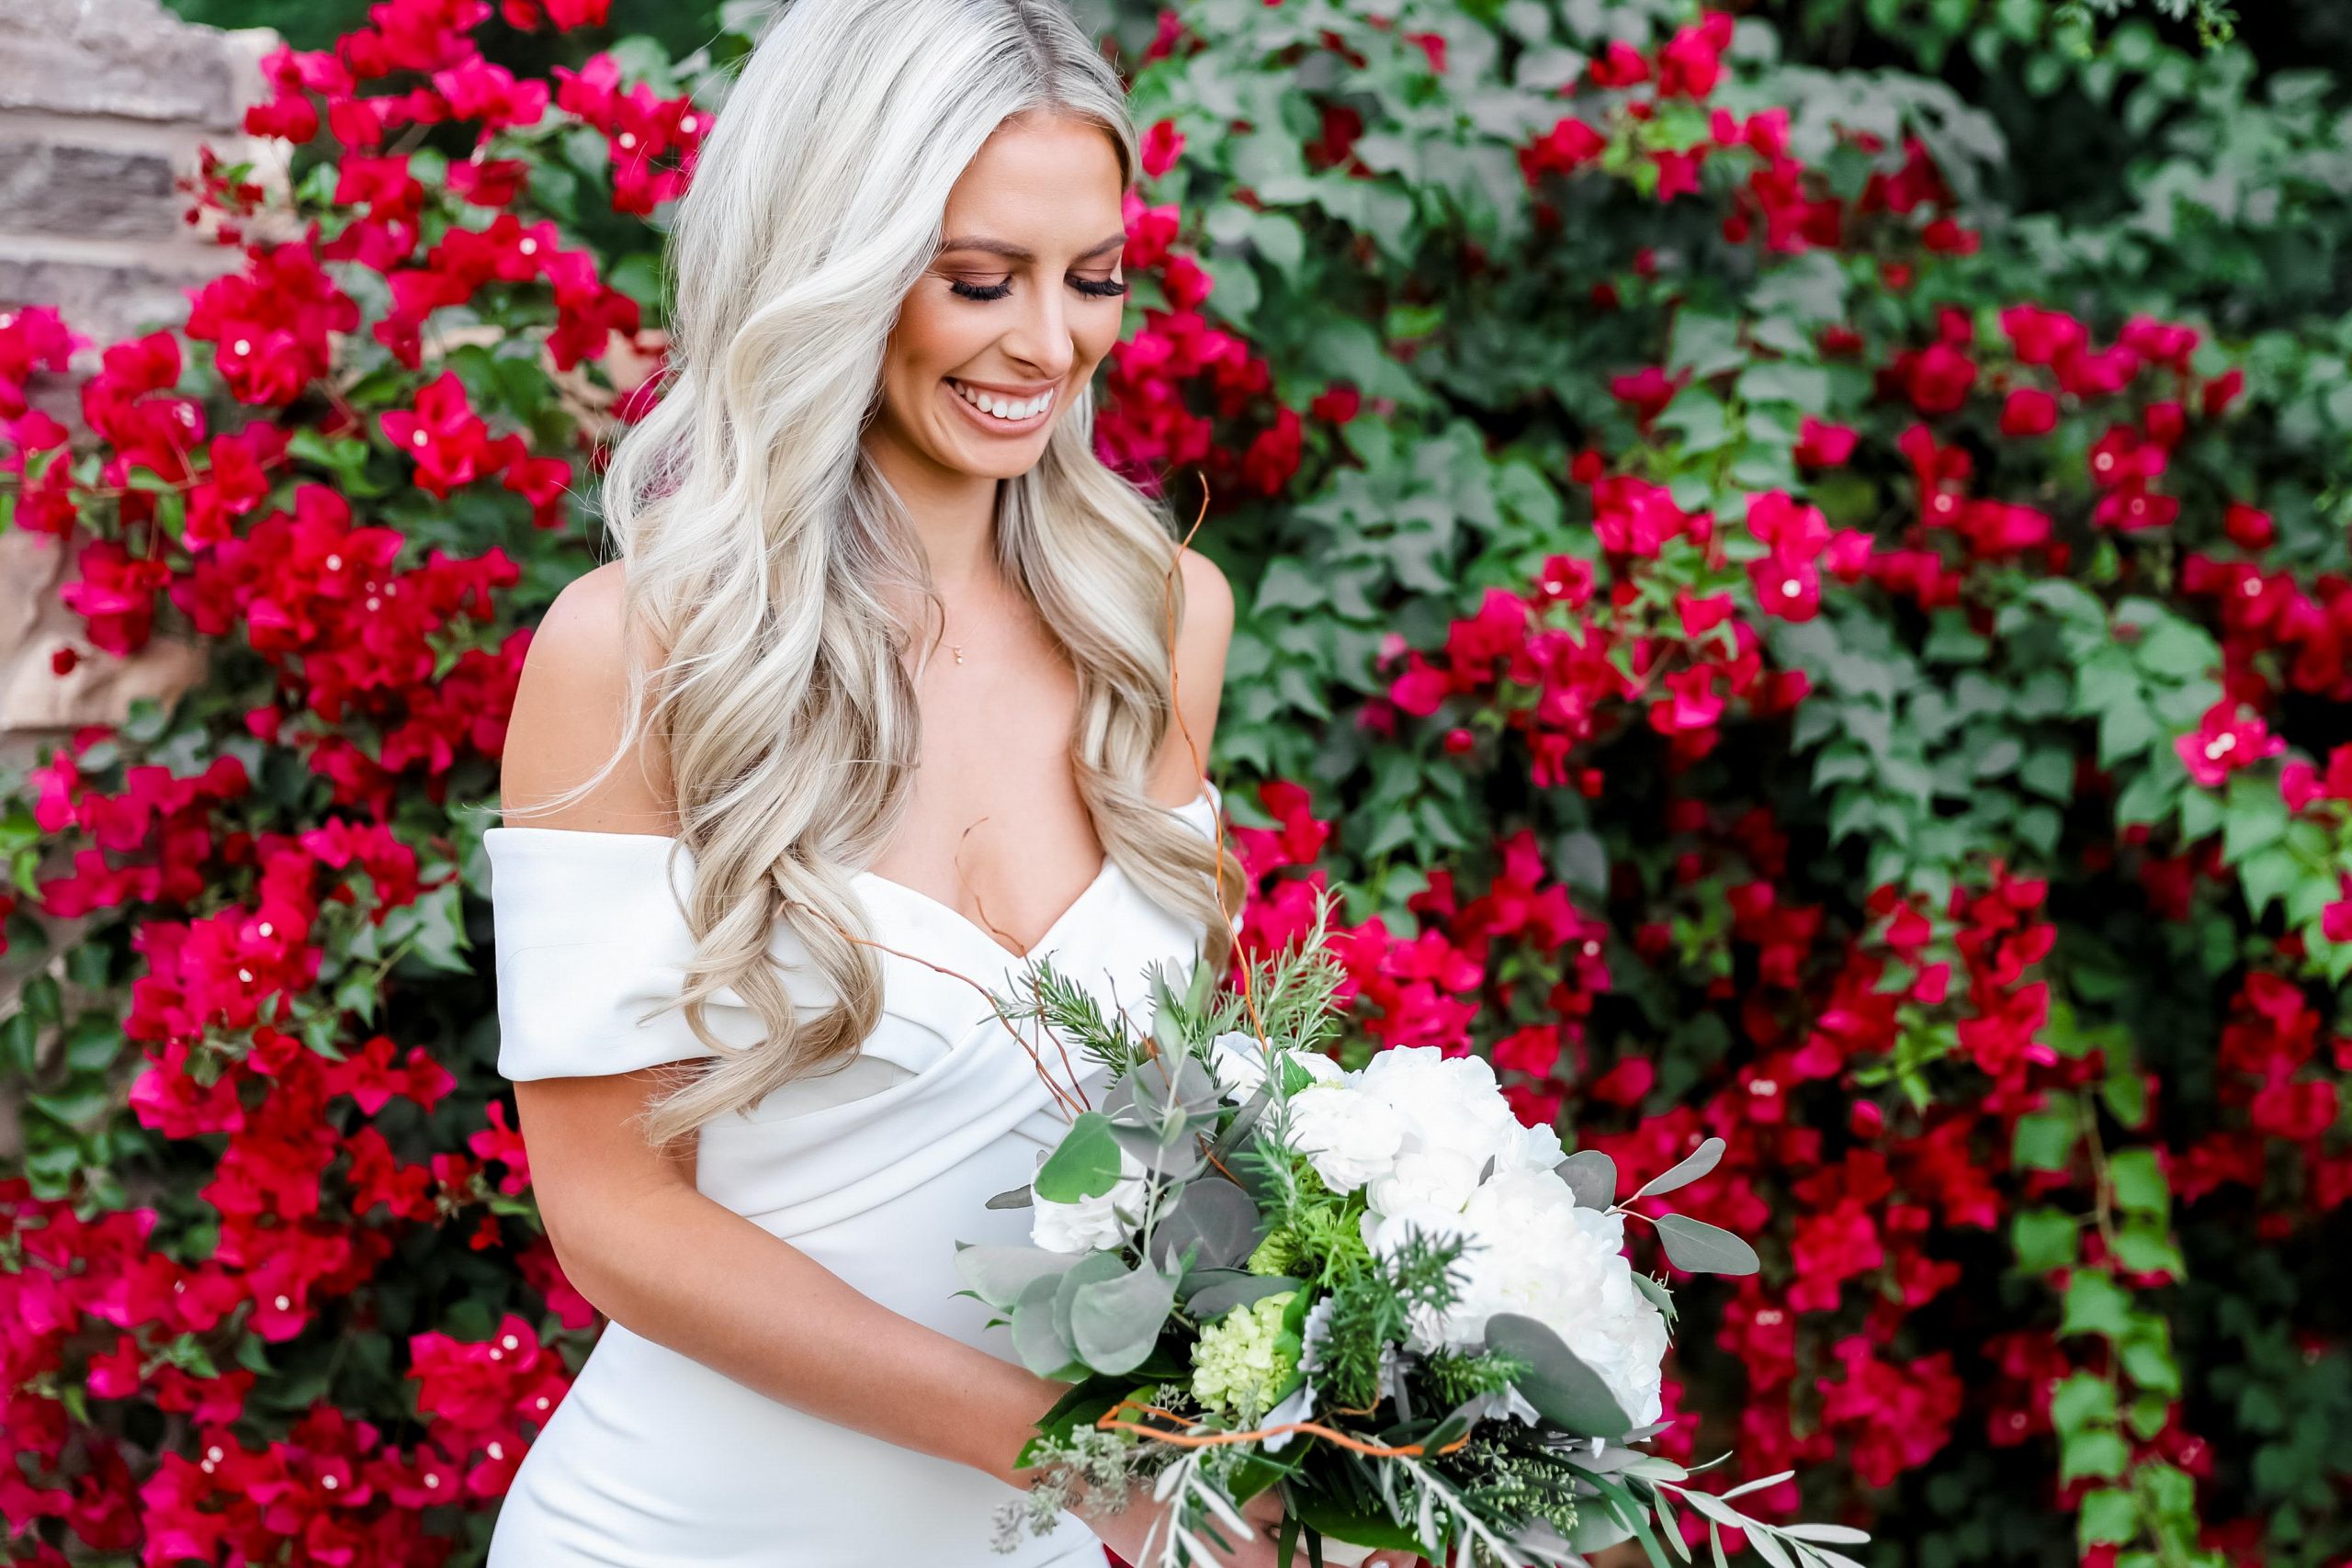 Outdoor wedding hairstyles that you'll love! - Click to explore the most gorgeous hairstyles that are perfect for outdoor weddings!